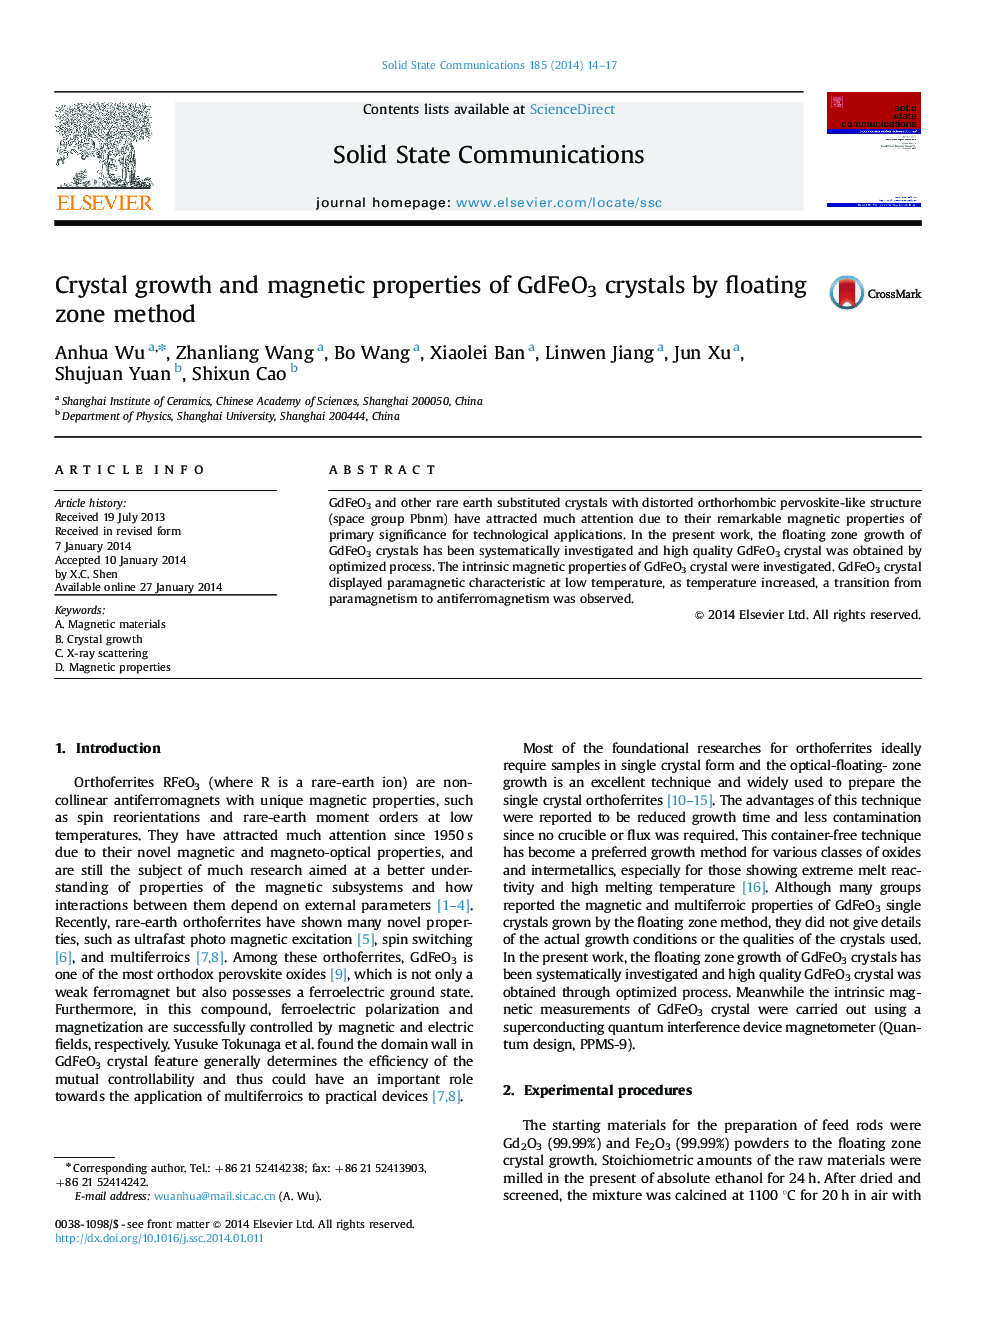 Crystal growth and magnetic properties of GdFeO3 crystals by floating zone method